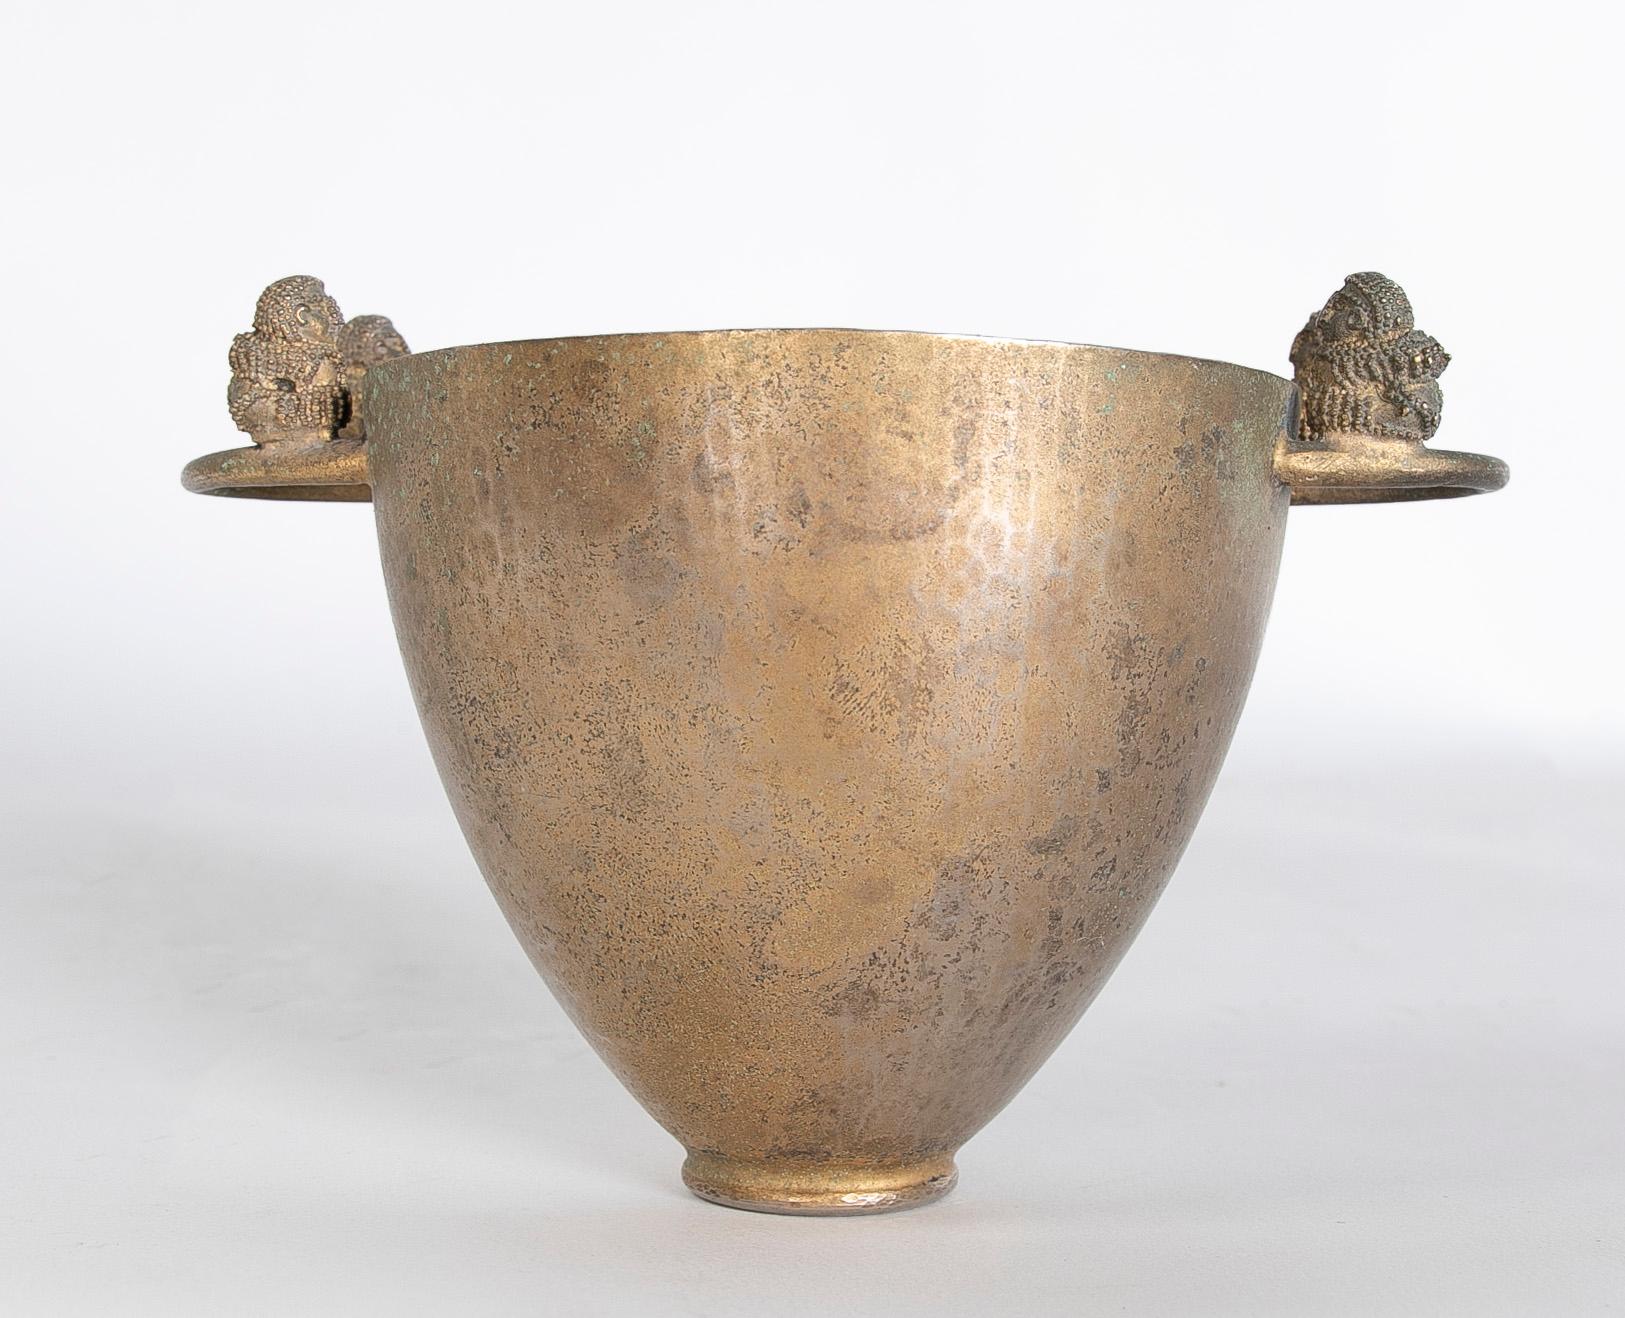 20th Century Oriental Bronze Vessel with Handles on the Sides